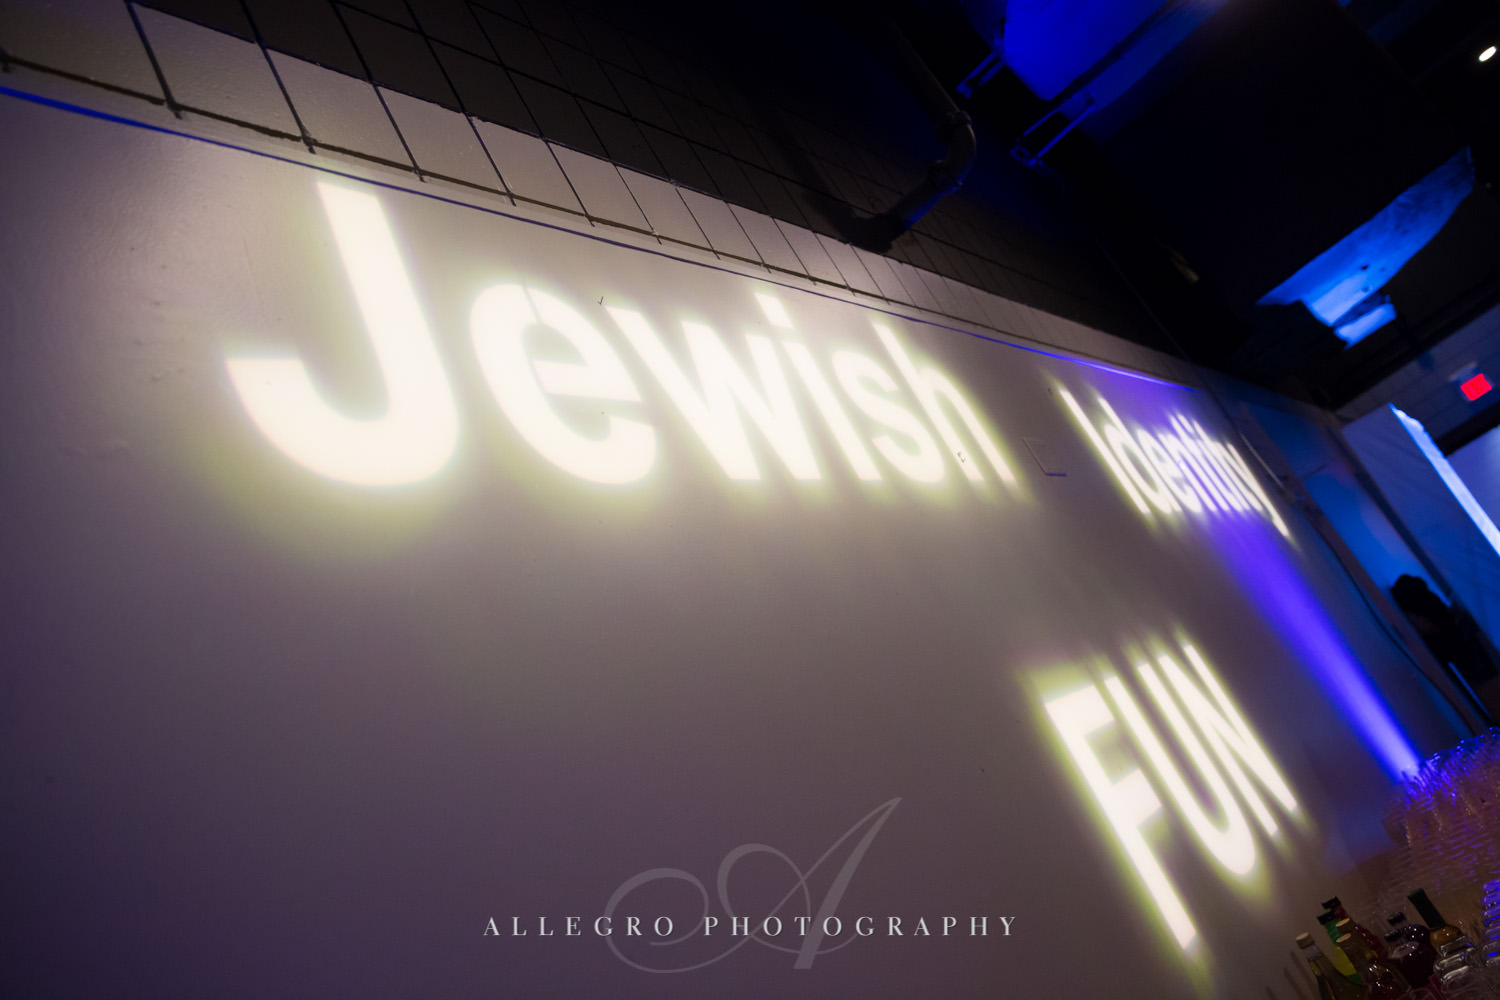 Projection decor at nonprofit event shot by Allegro Photography